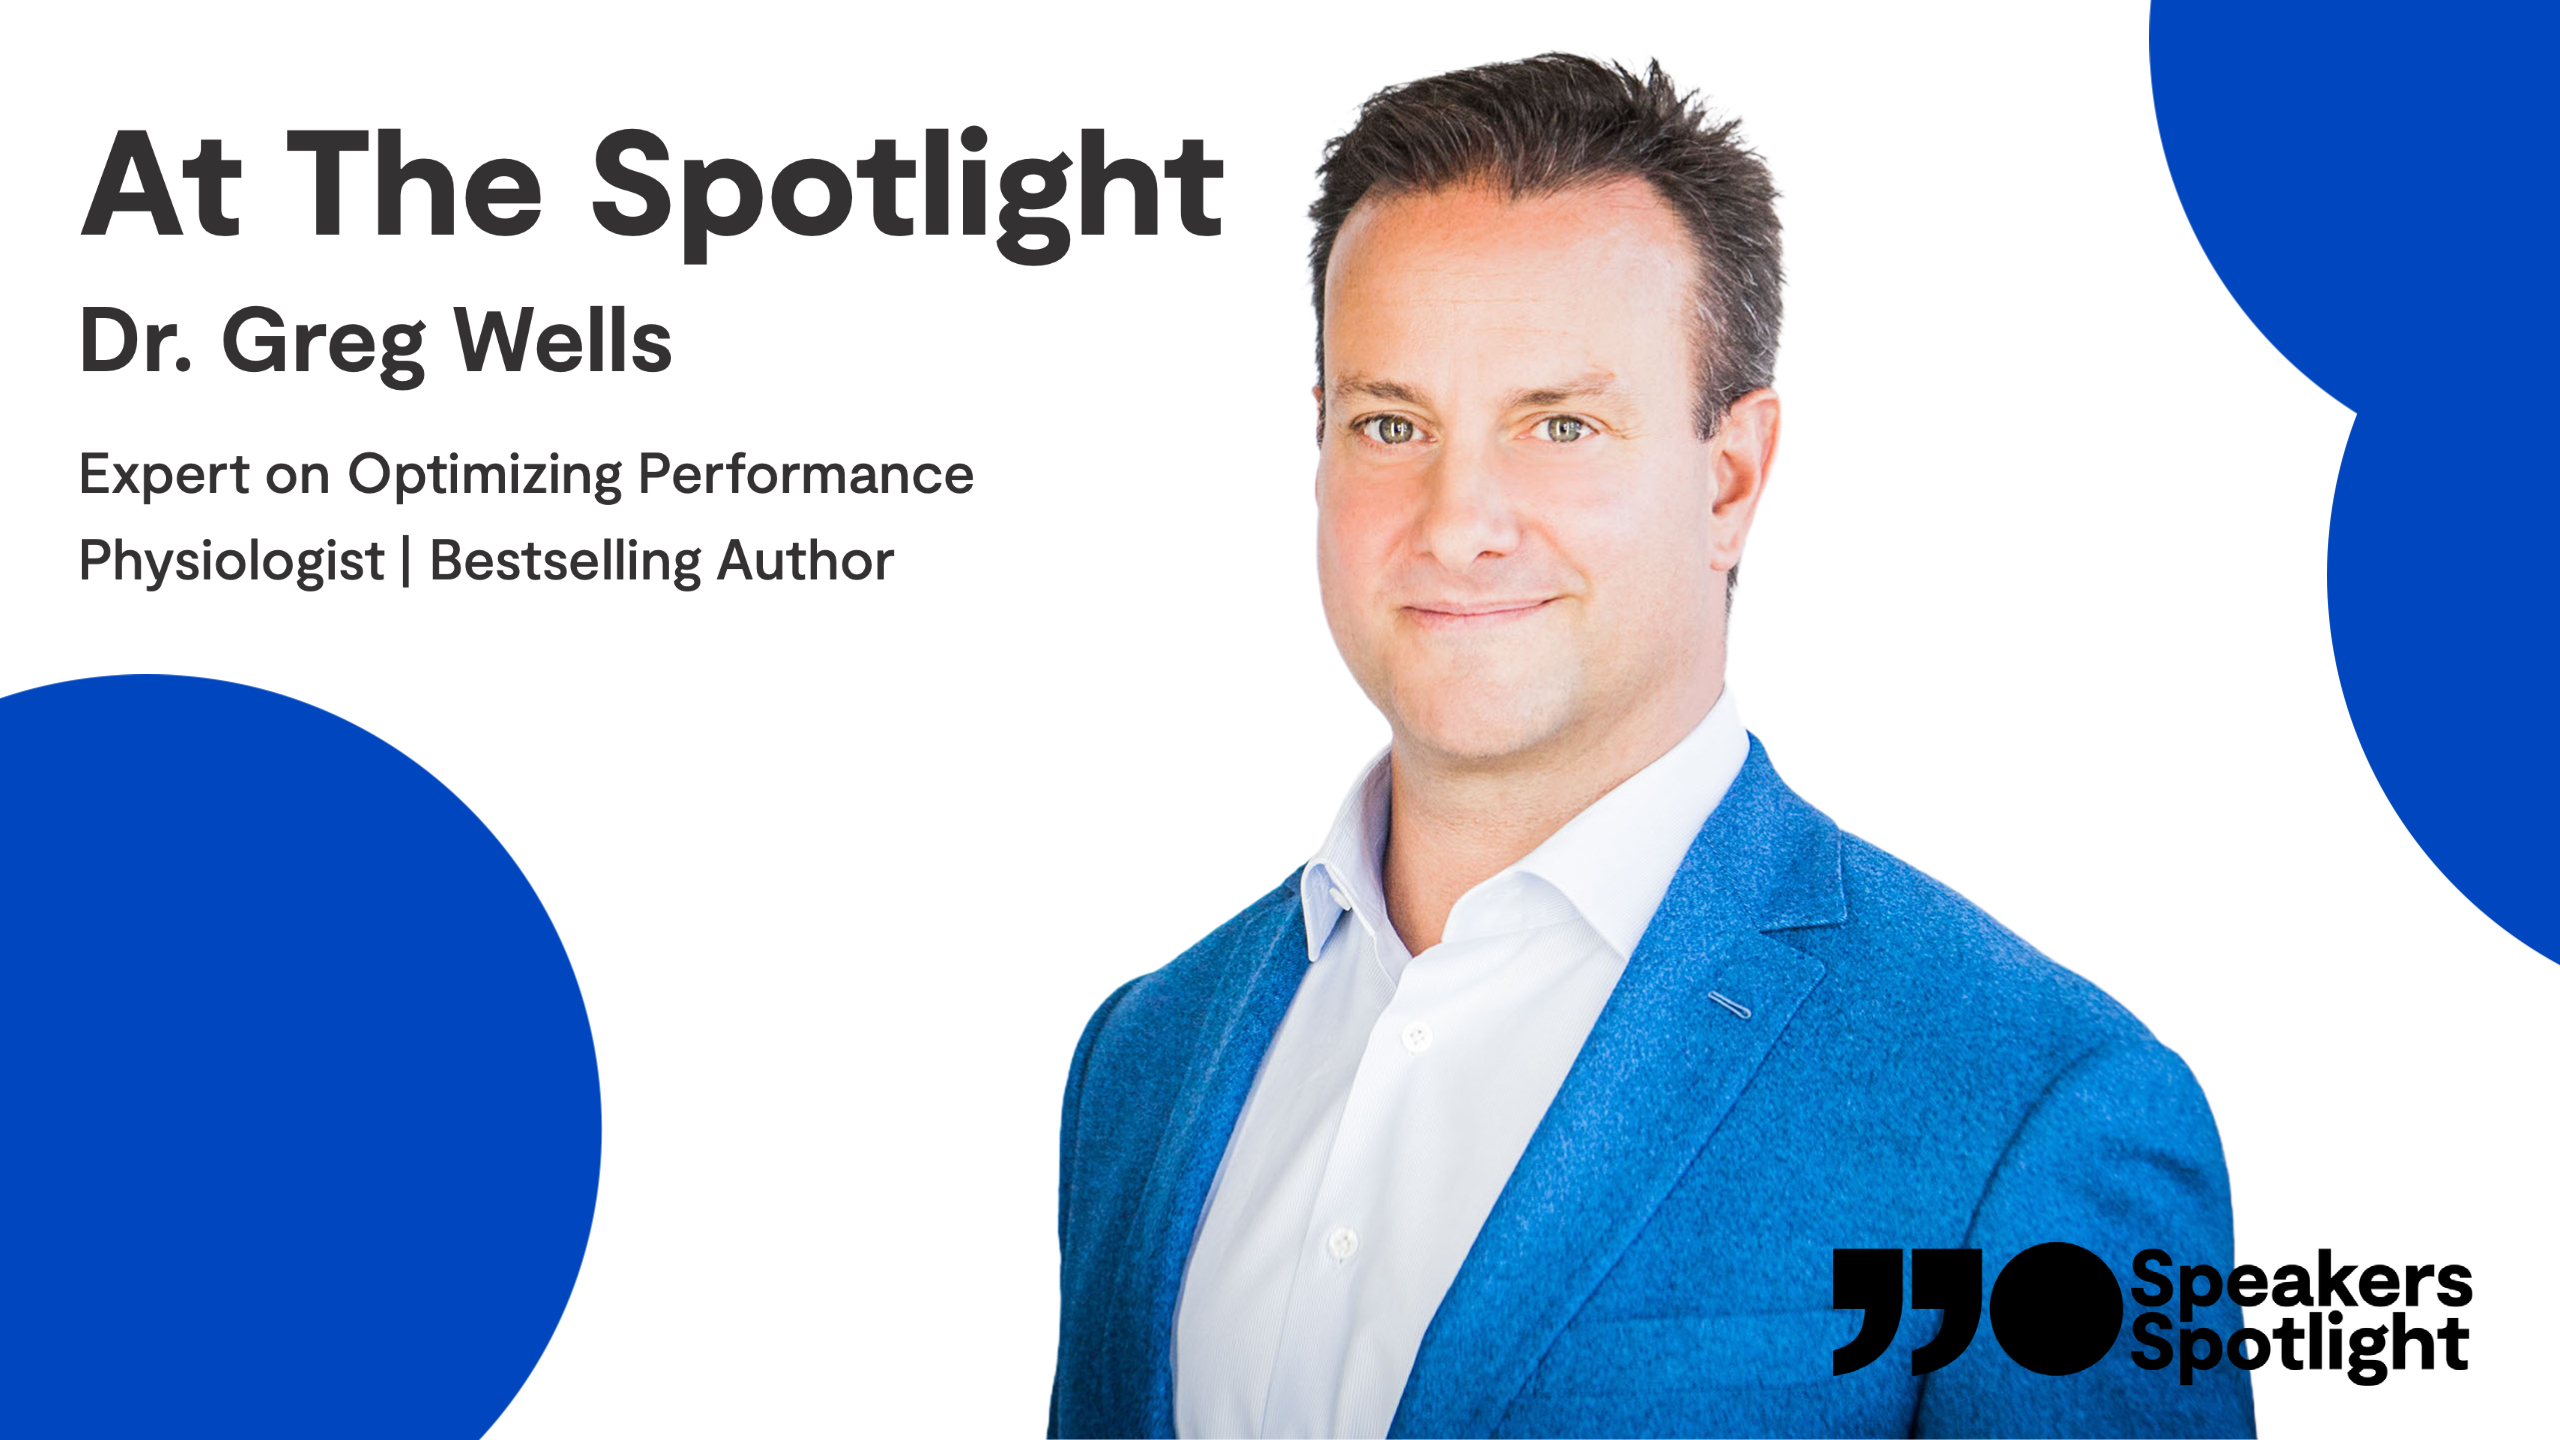 At The Spotlight: Healthy High Performance with Dr. Greg Wells